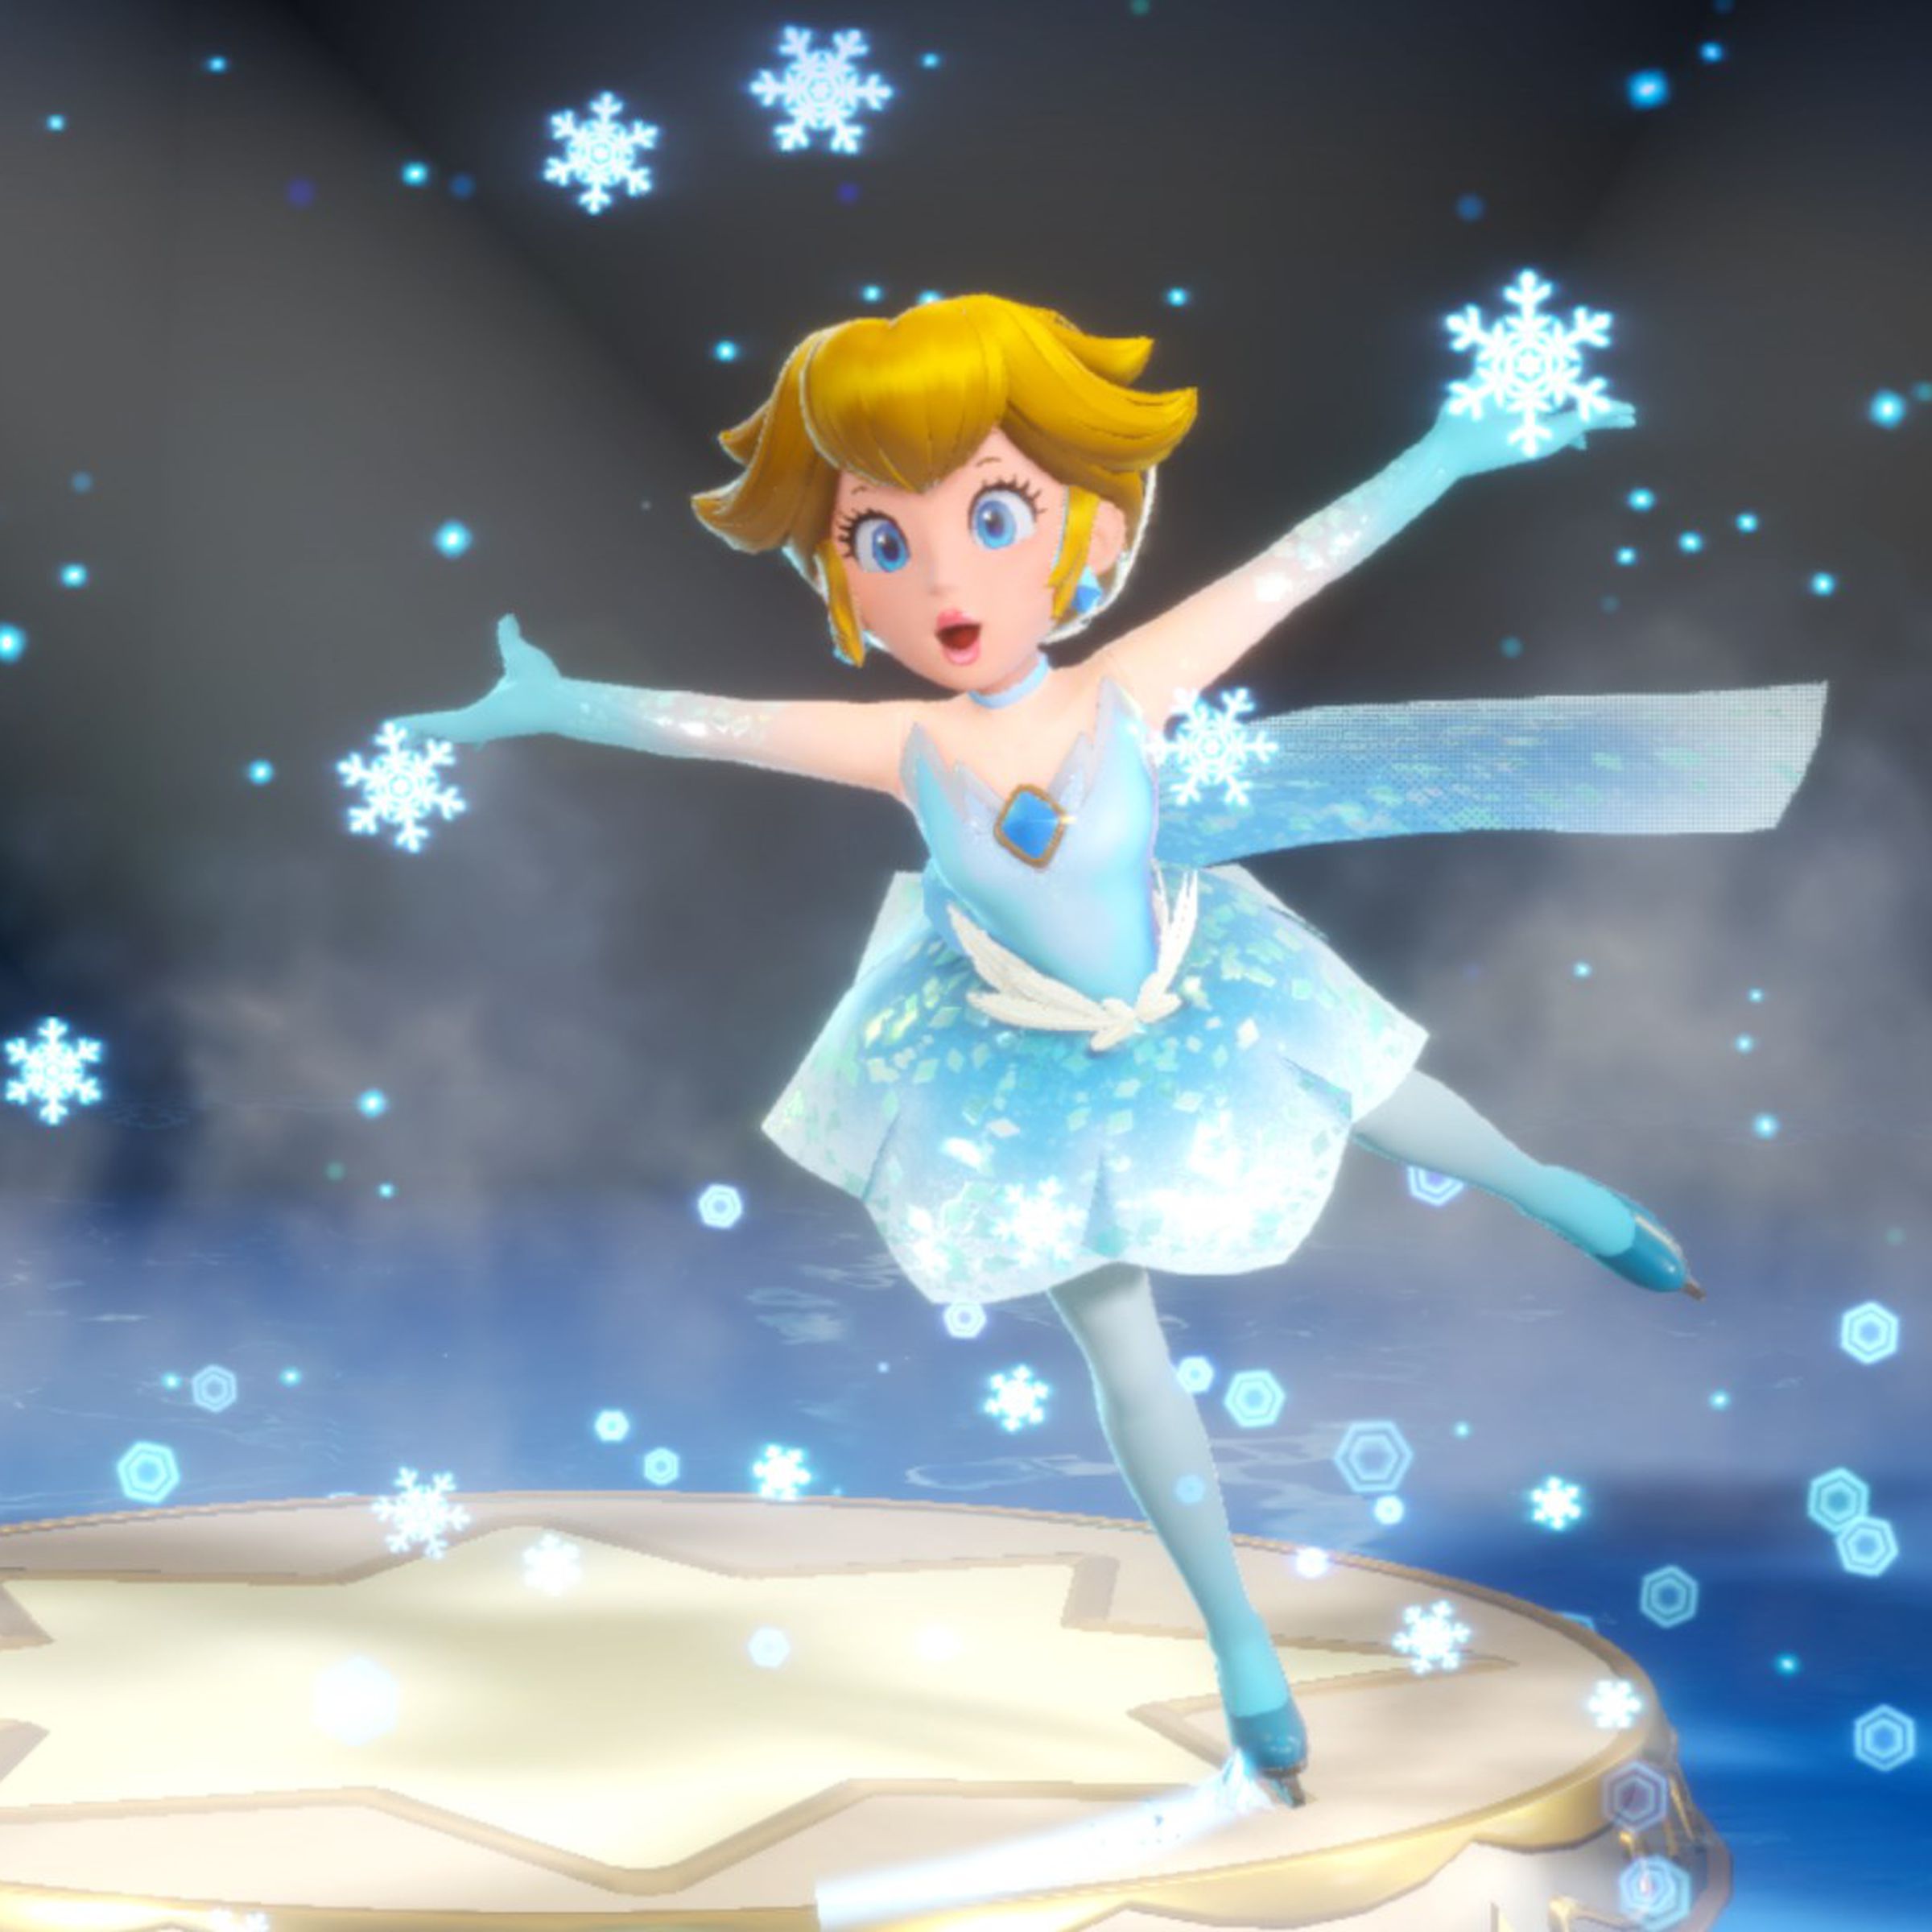 Screenshot from Princess Peach: Showtime! featuring Princess Peach in an ice blue figure skating leotard skating, extending her arms out wide with a joyous expression on her face.